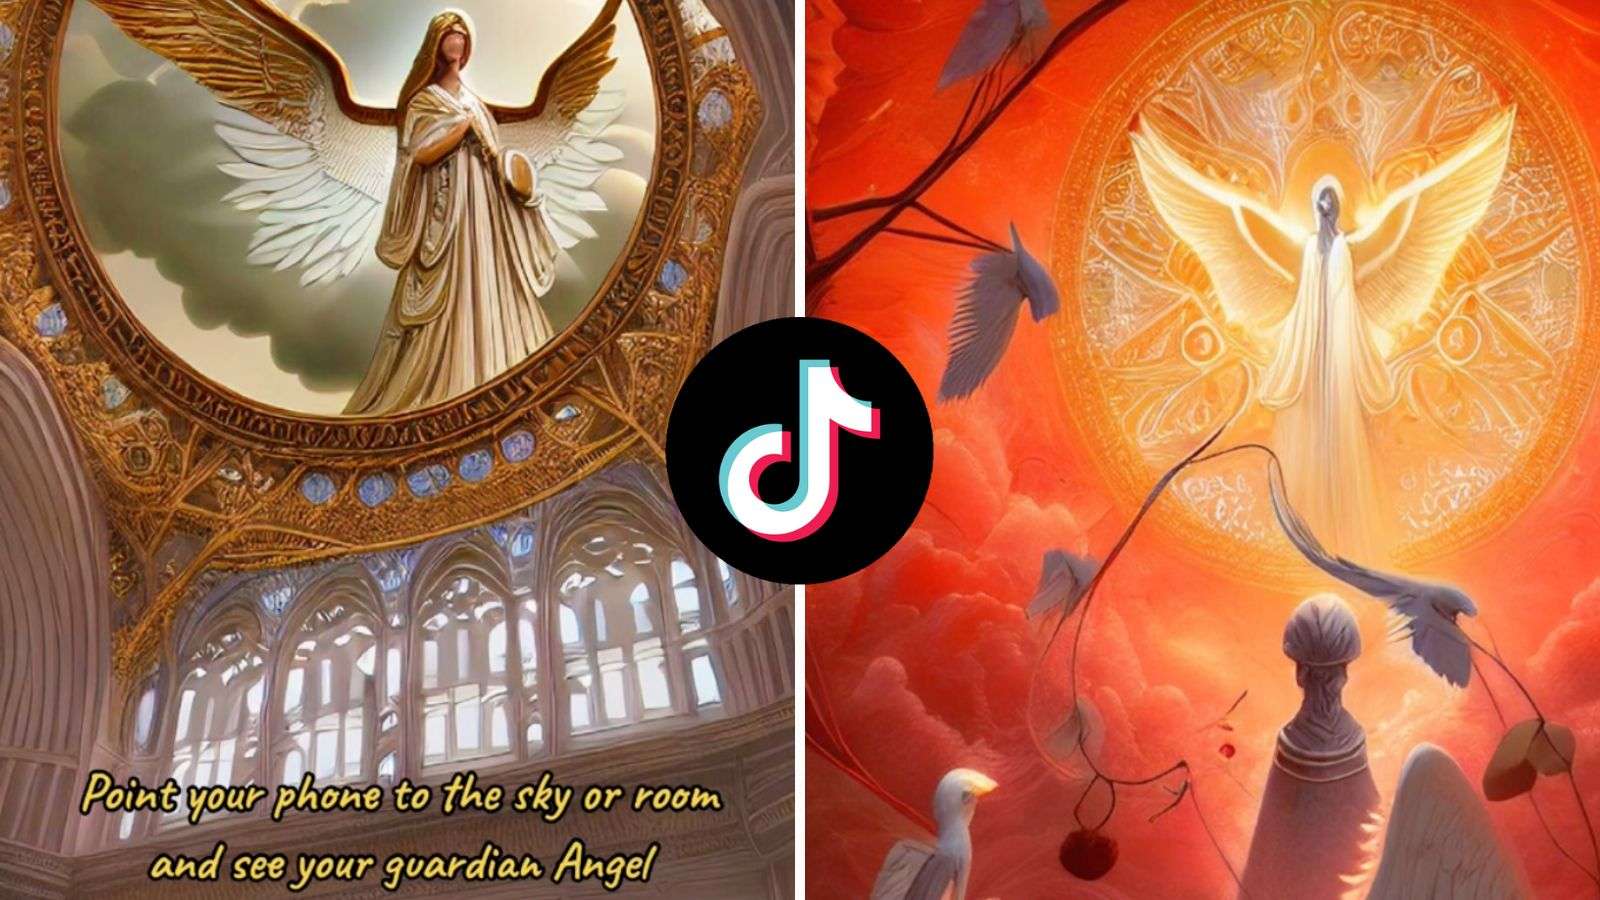 How to get the Guardian Angel filter on TikTok